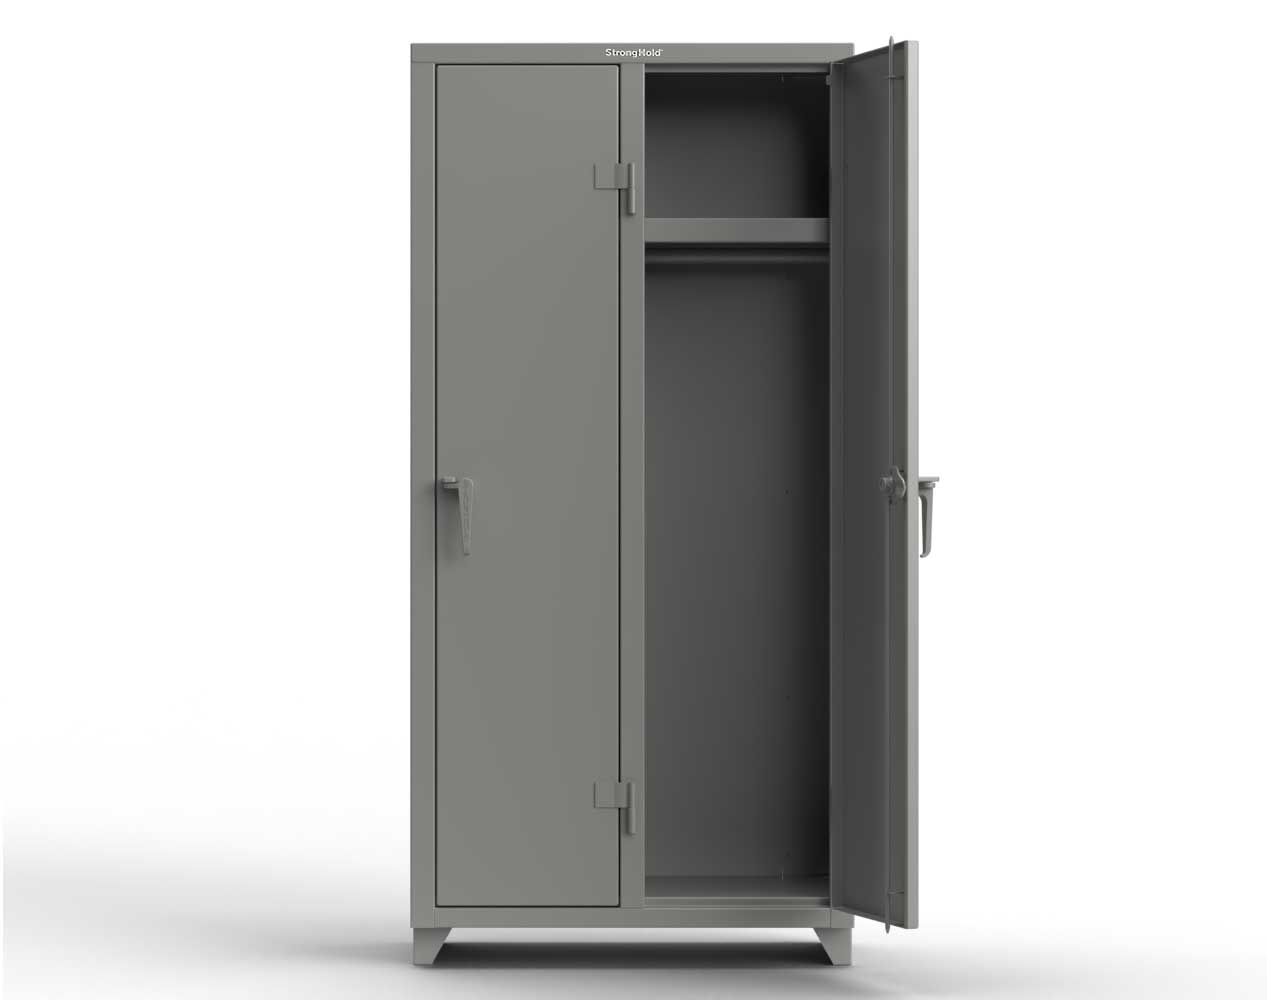 Extra Heavy Duty 14 GA Single-Tier Locker with Shelf and Hanger Rod, 2 Compartments - 36 in. W x 18 in. D x 75 in. H